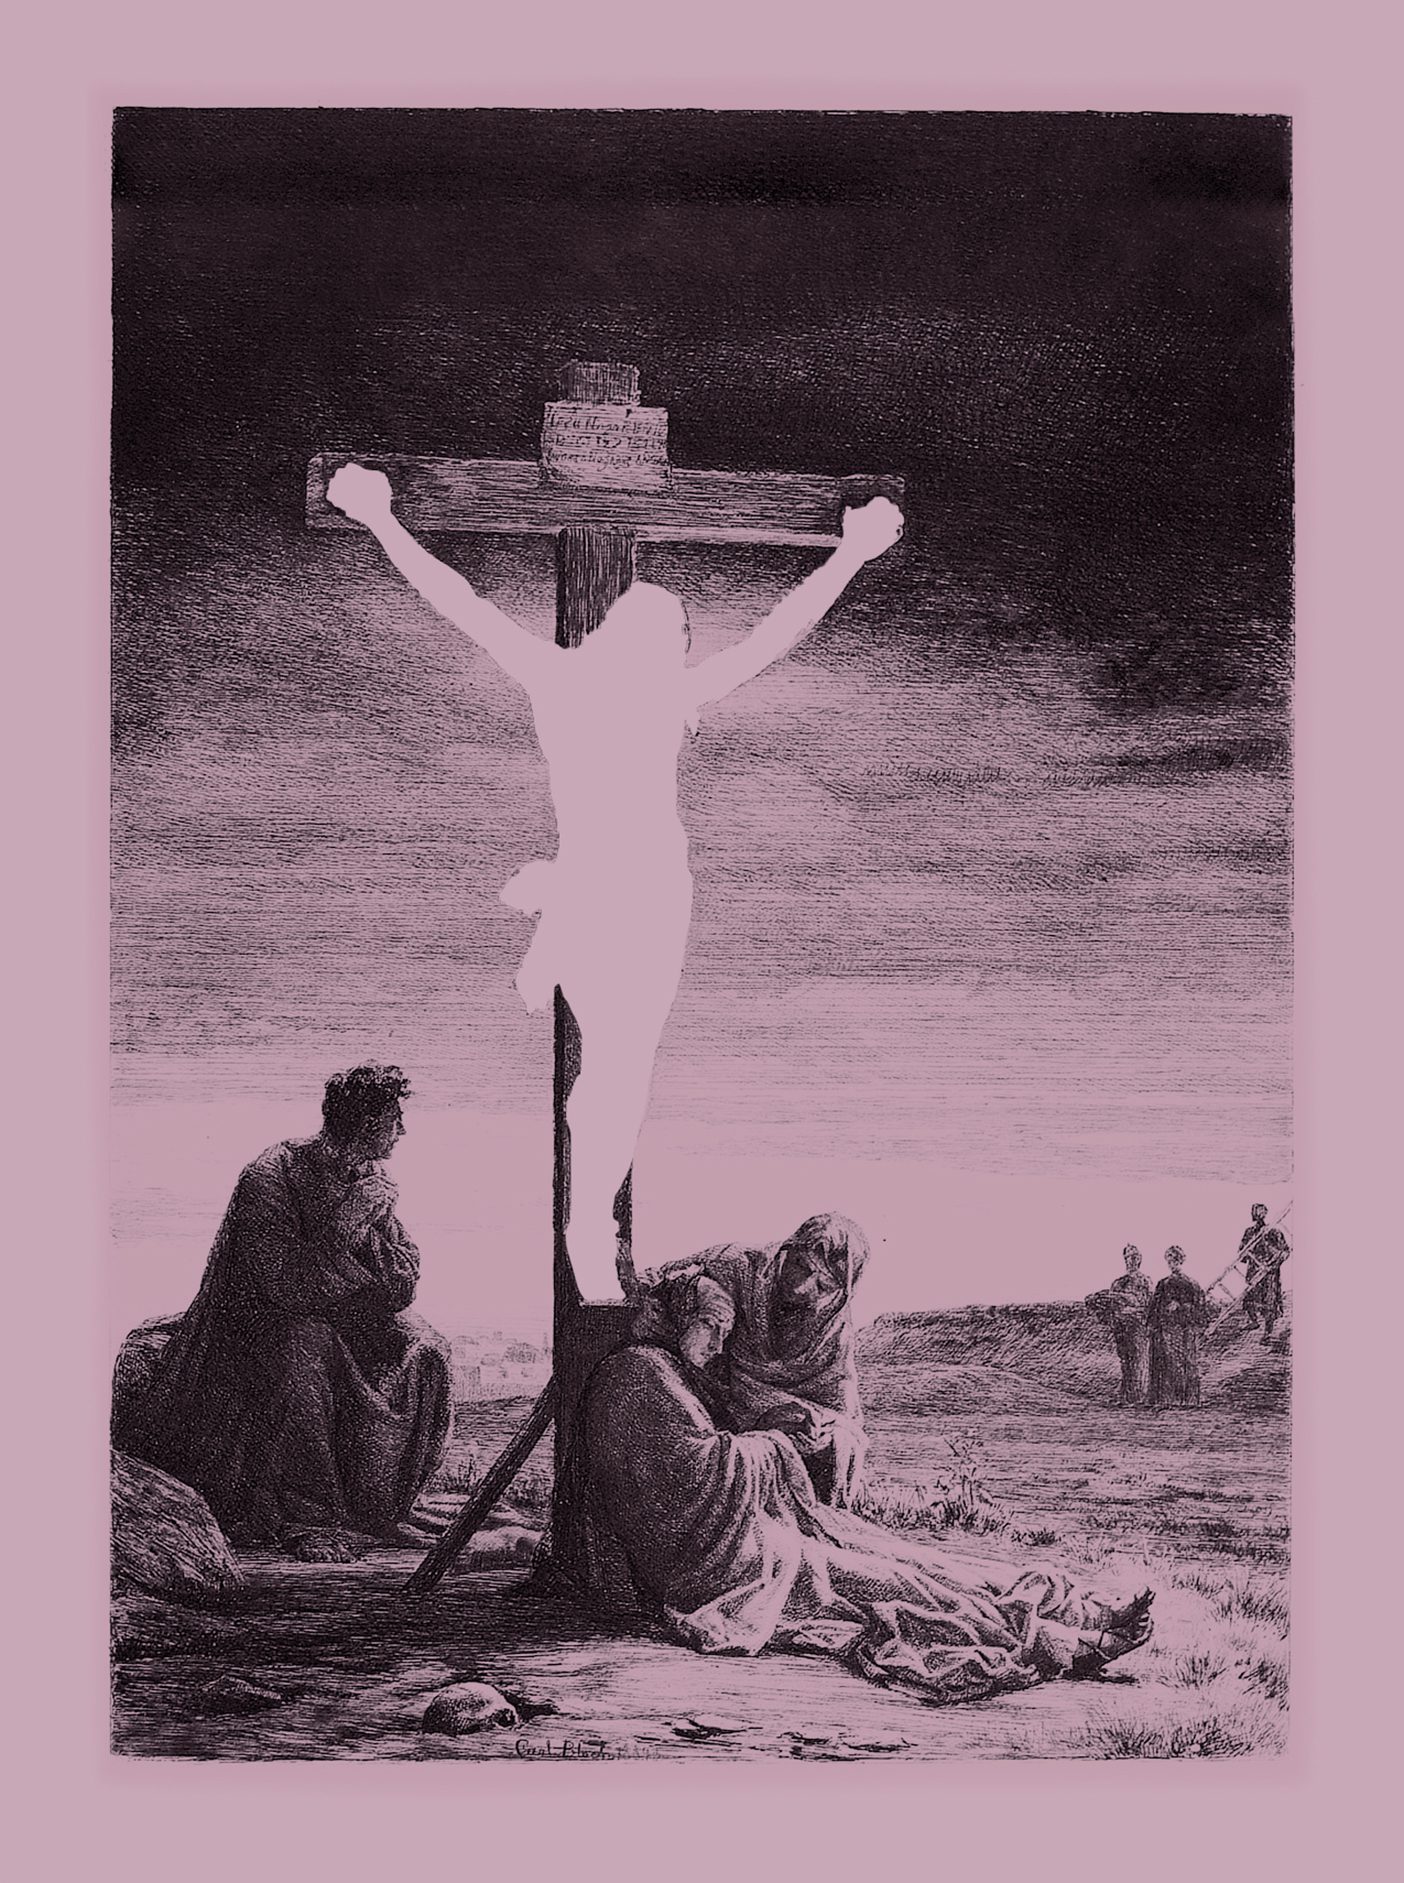 A wood etching by Carl Bloch shows Christ on the cross. The figure of Christ is cropped out, leaving a color background in His place.